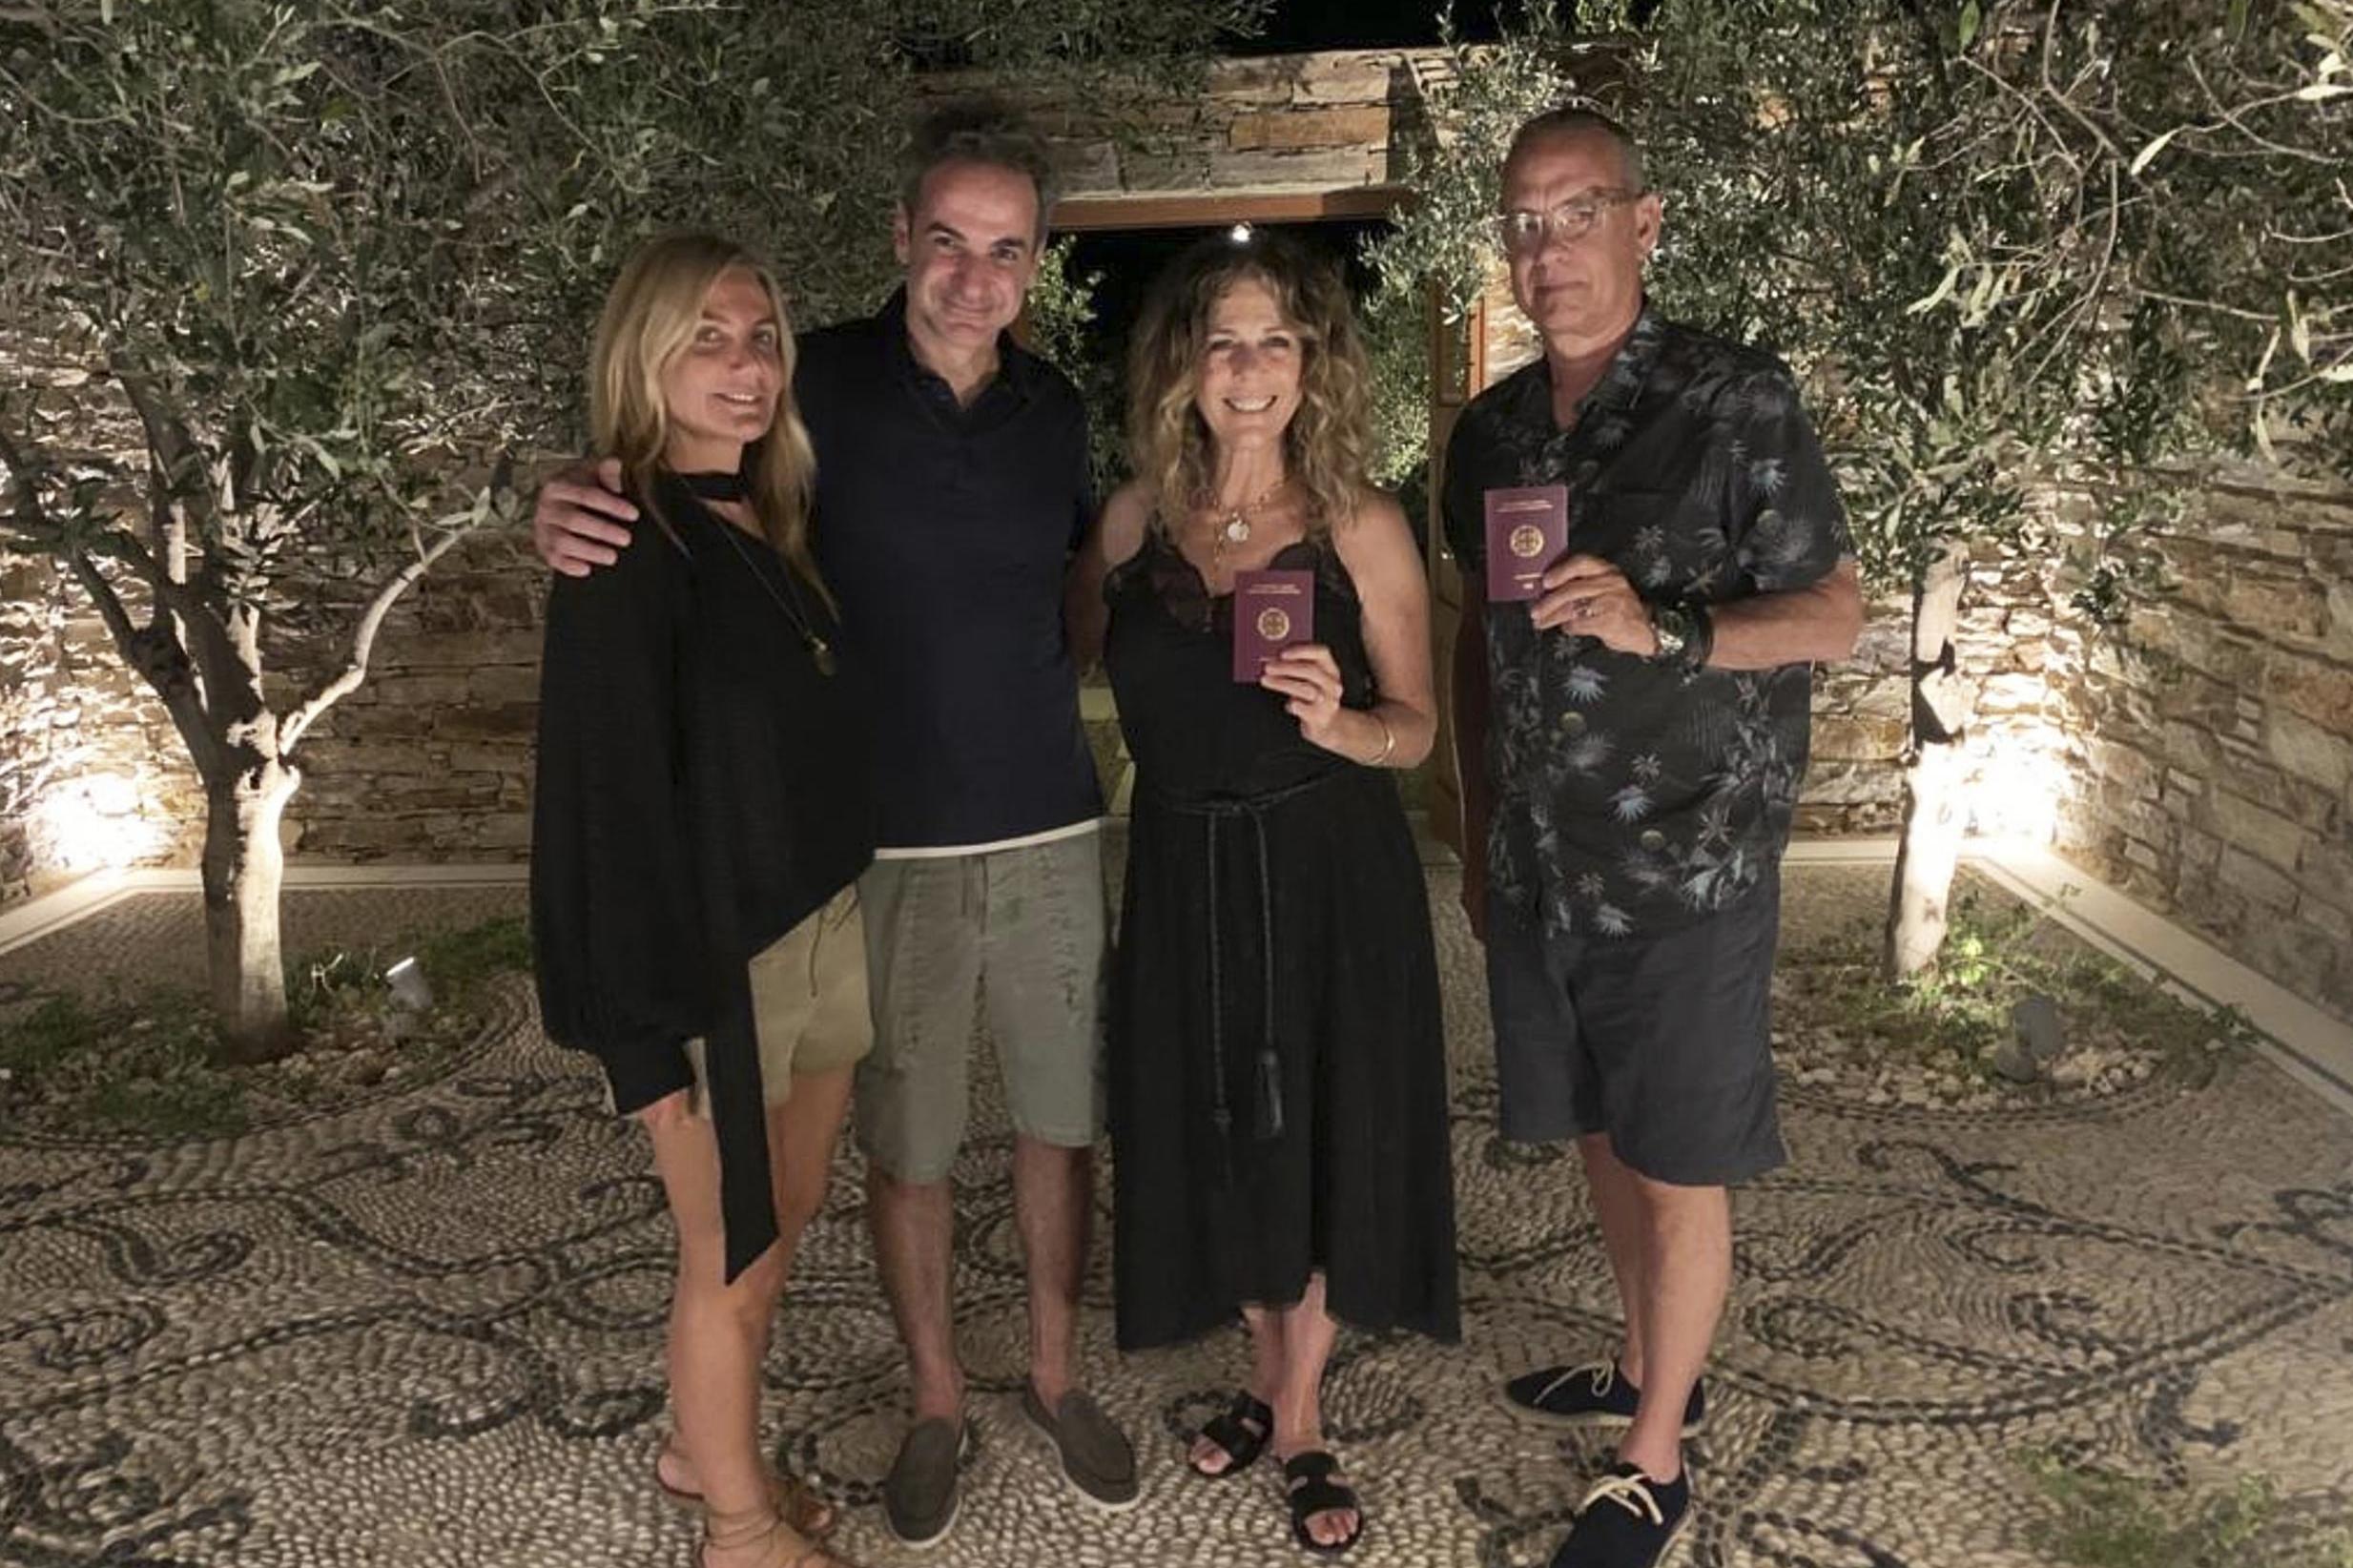 Tom Hanks and Rita Wilson granted Greek citizenship for wildfire relief work